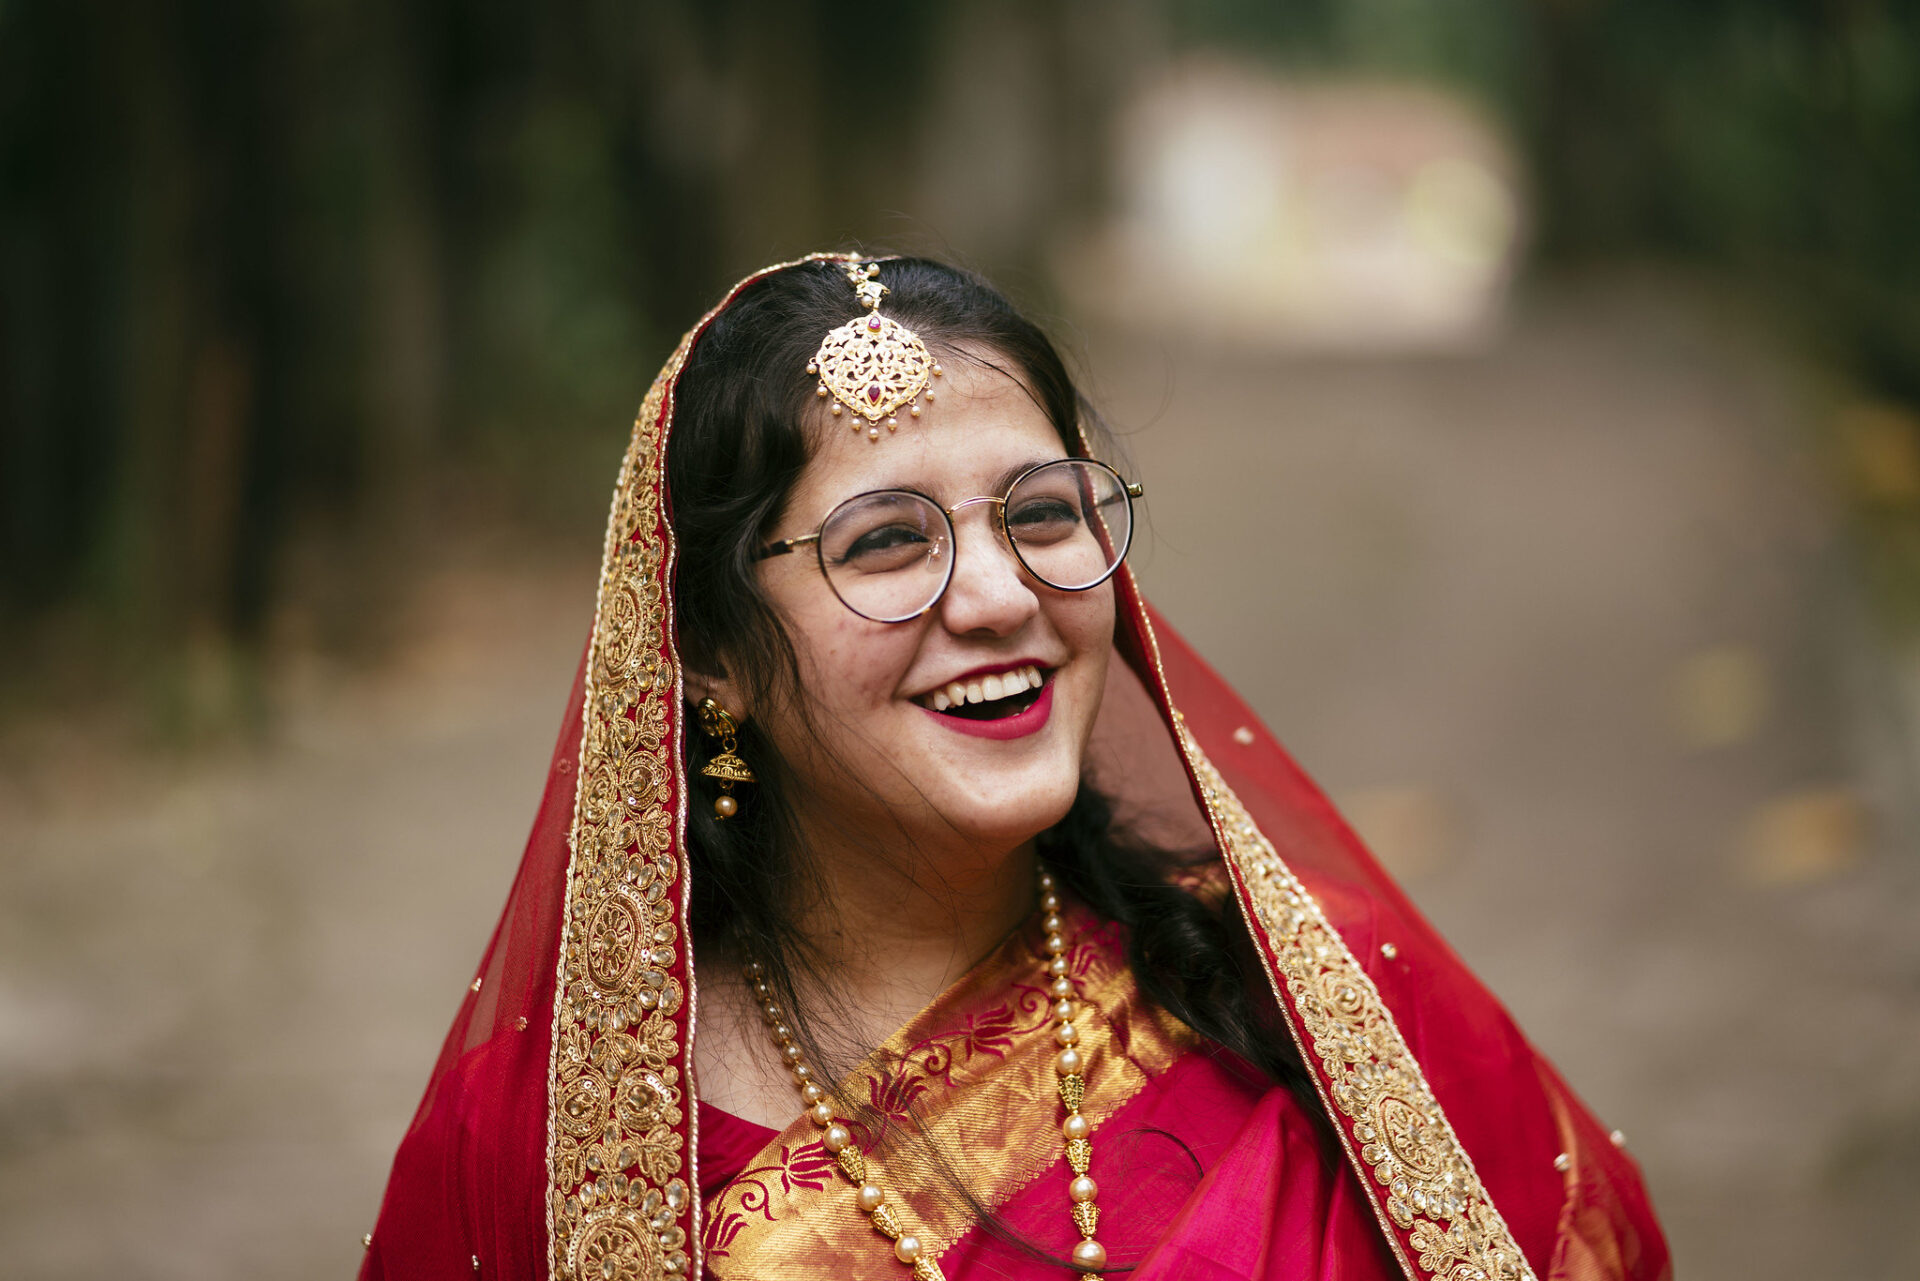 In Bangladesh, a bride wear smiles into the distance. She is wearing spectacles and a beautiful red sari.